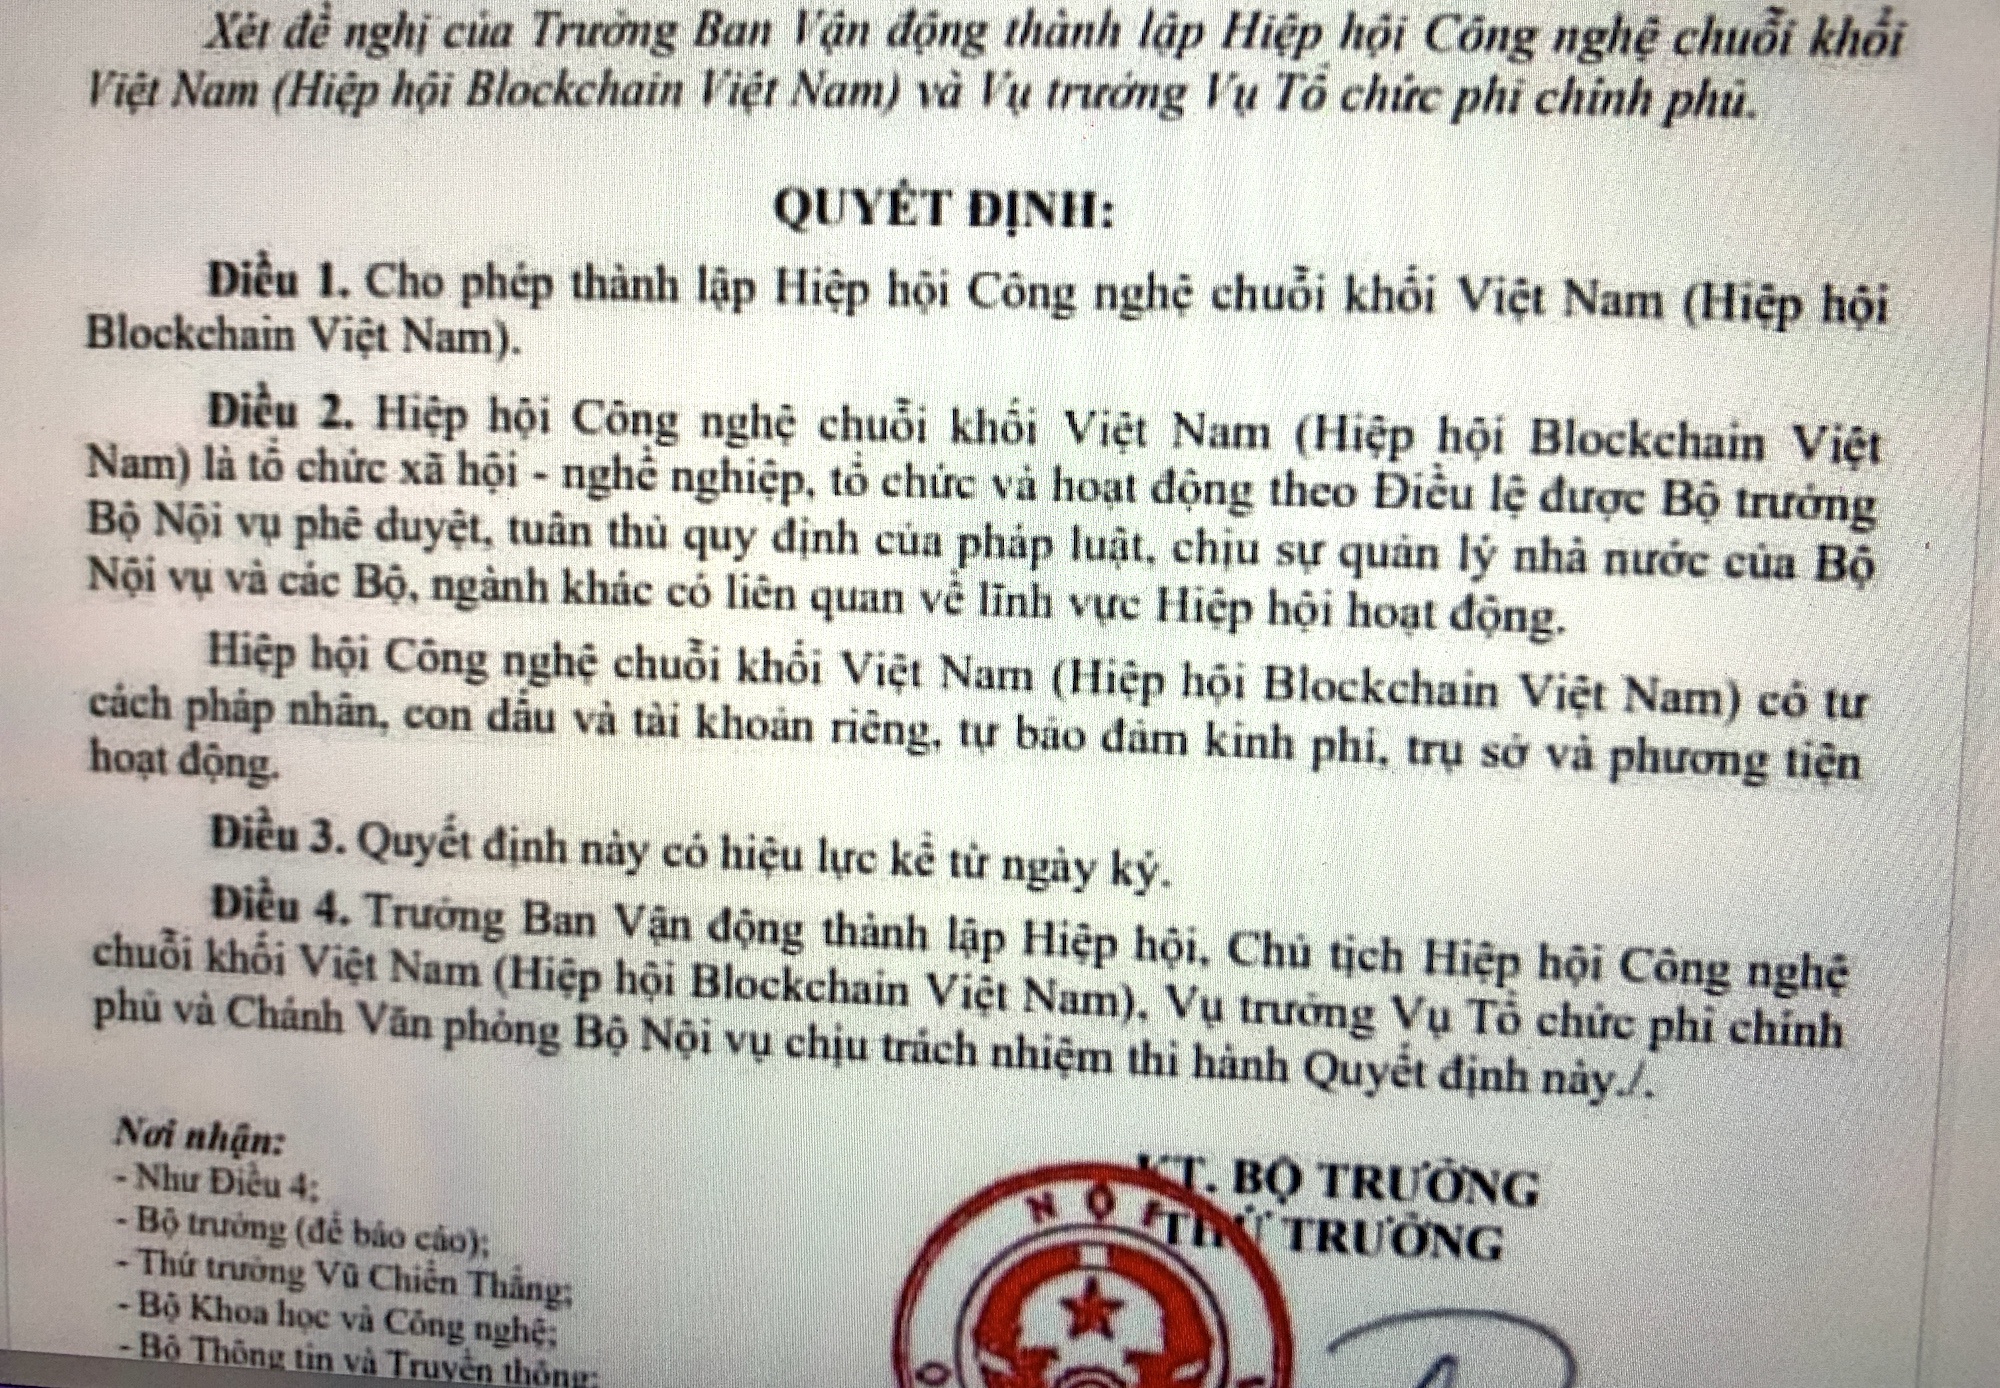 Vietnam is about to have a Blockchain Association - Photo 1.